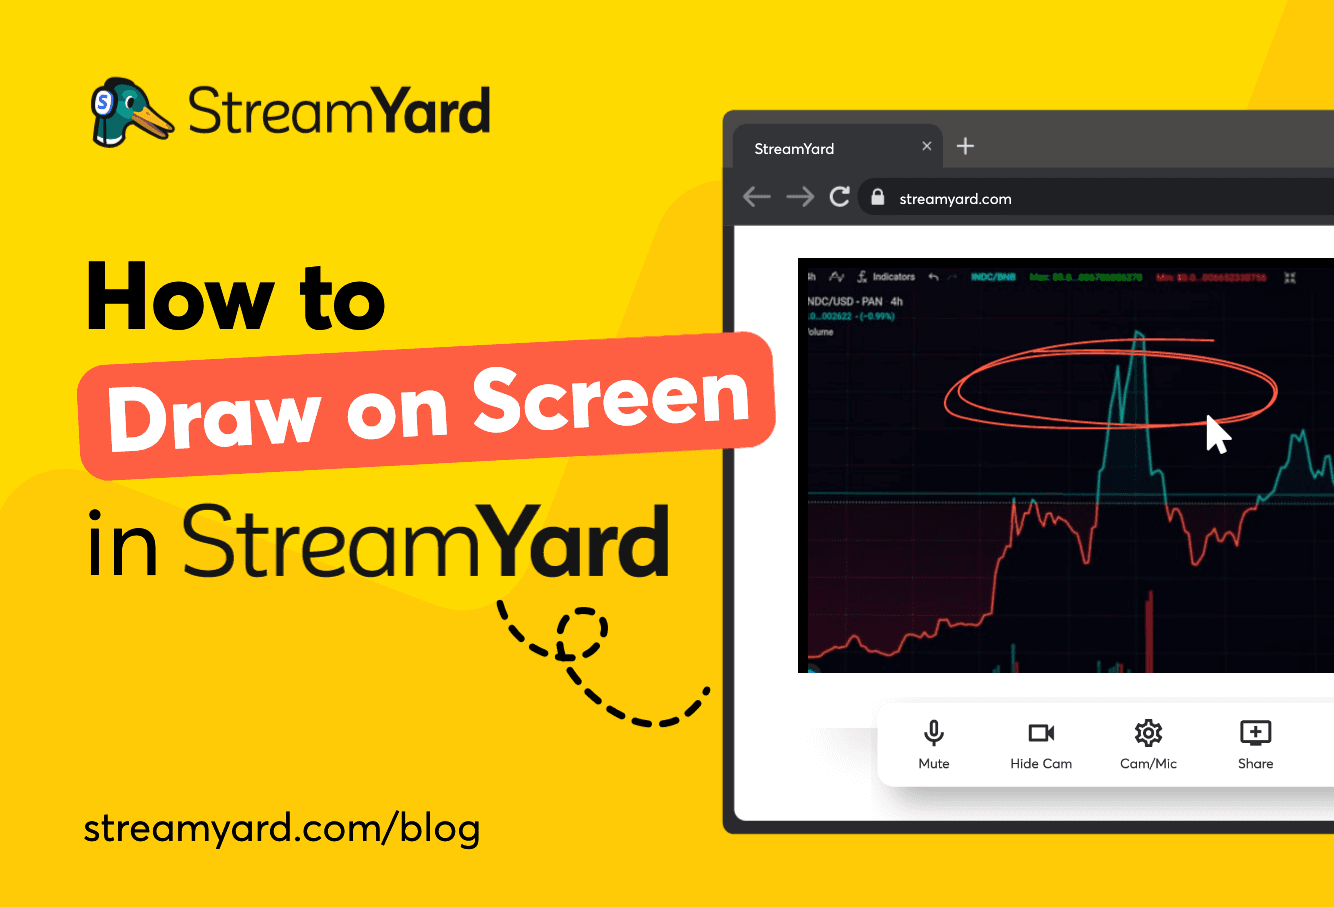 Learn how to draw on screen in StreamYard and increase the impact of your live content with this easy to follow guide on writing when live.